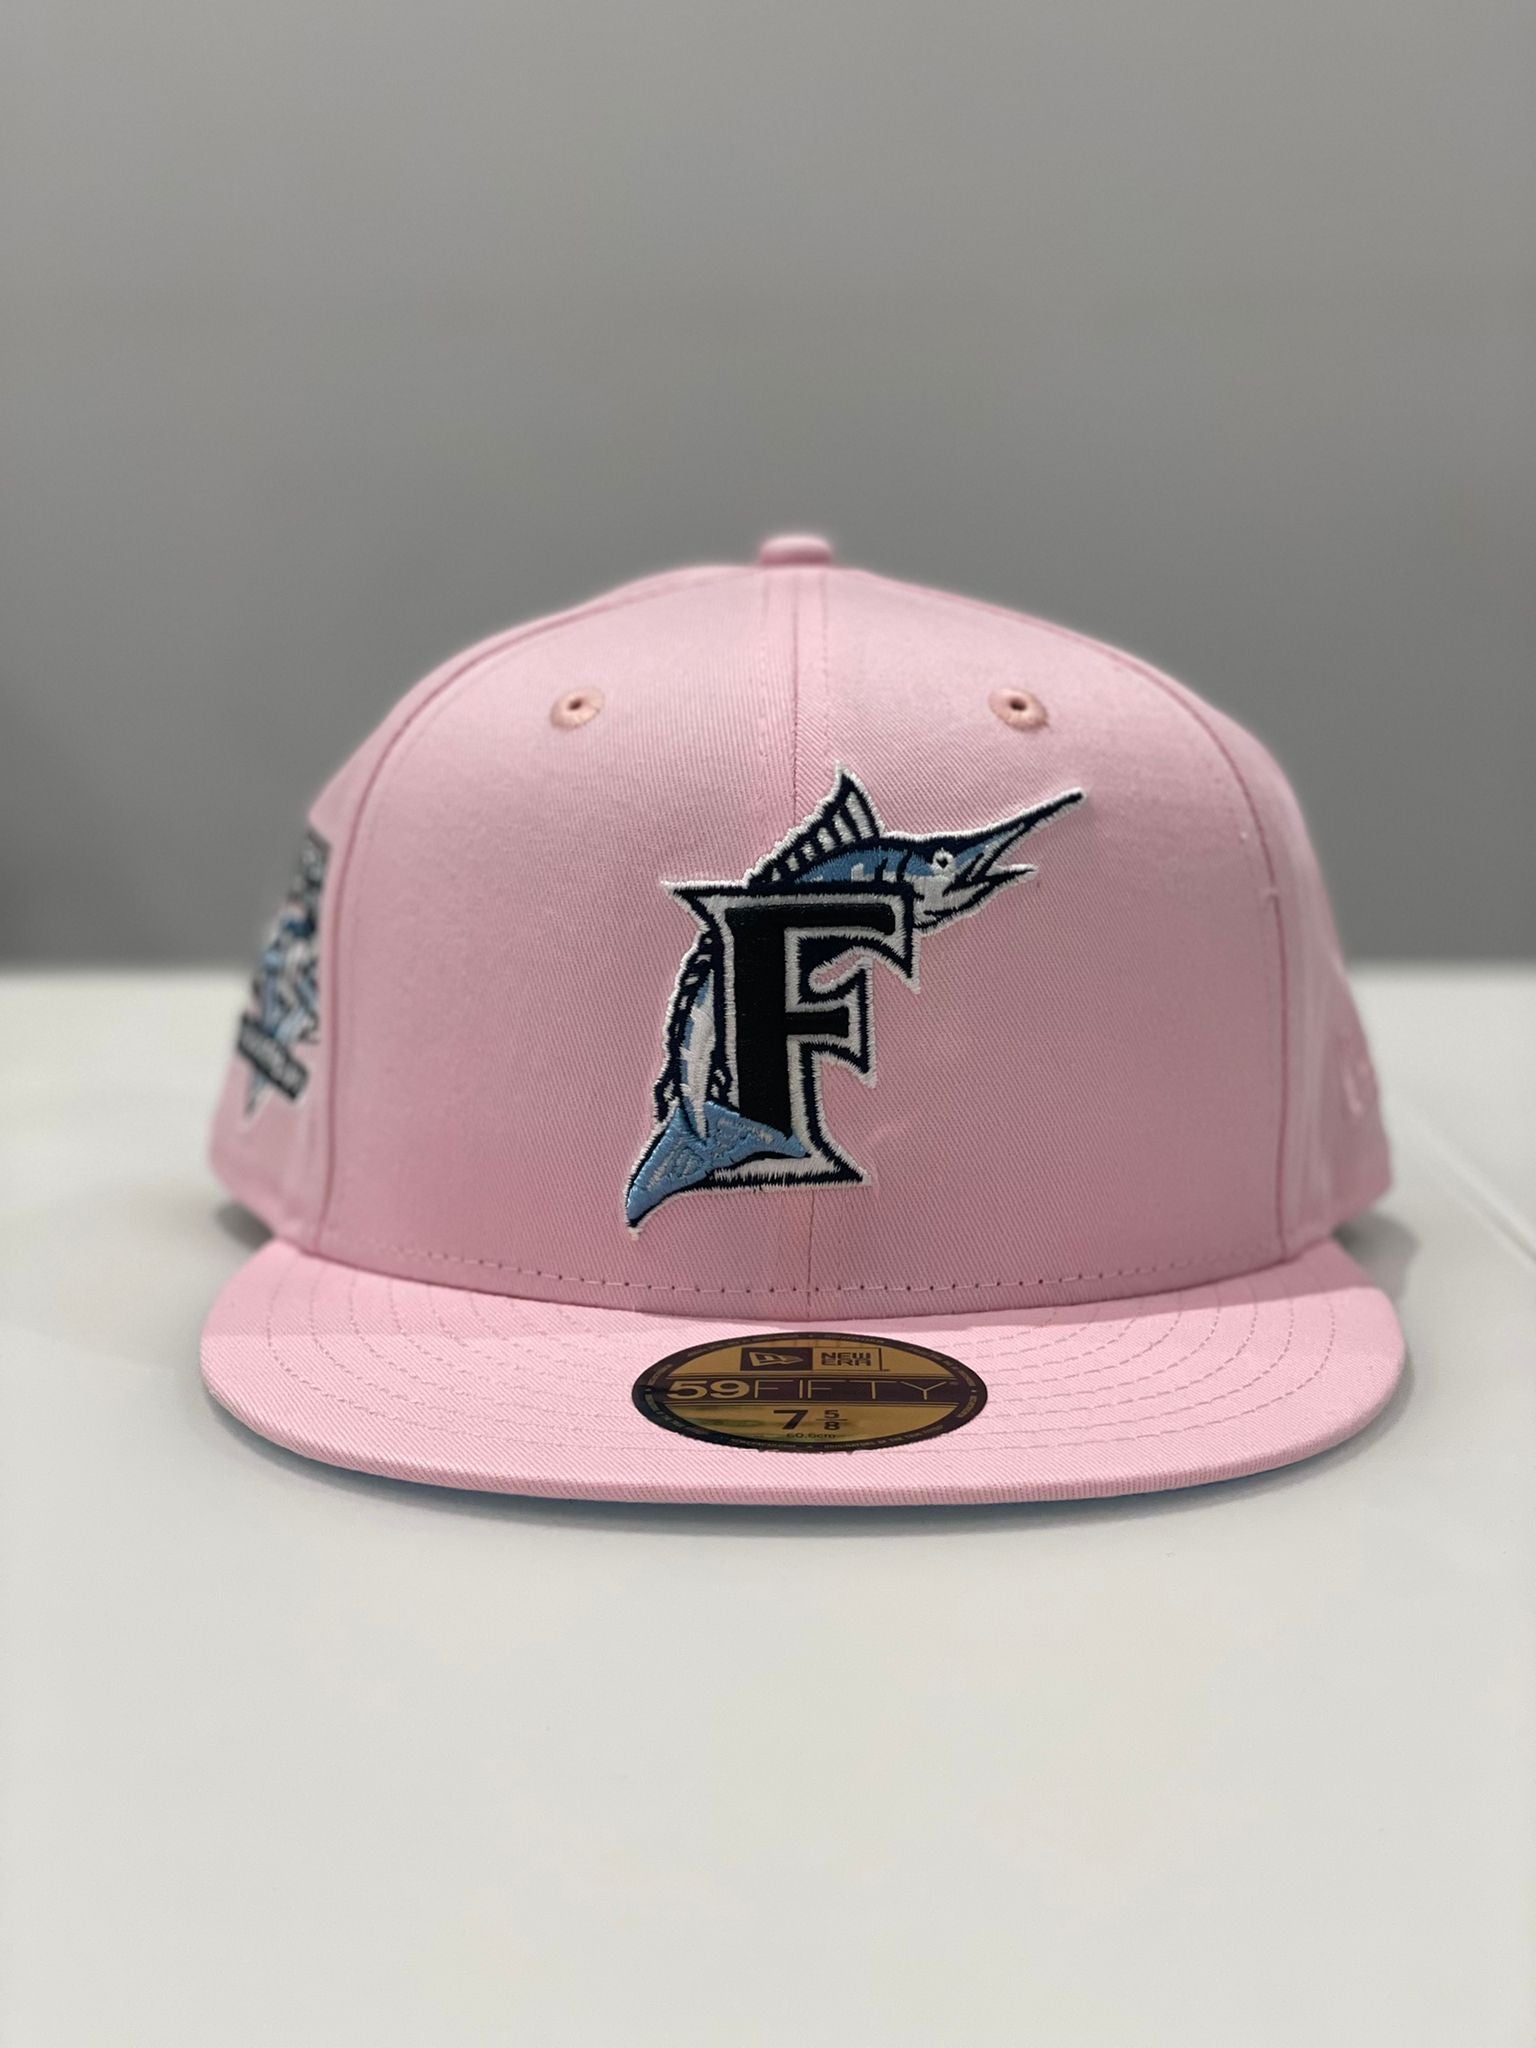 Dbacks Cotton Candy Fitted Hats